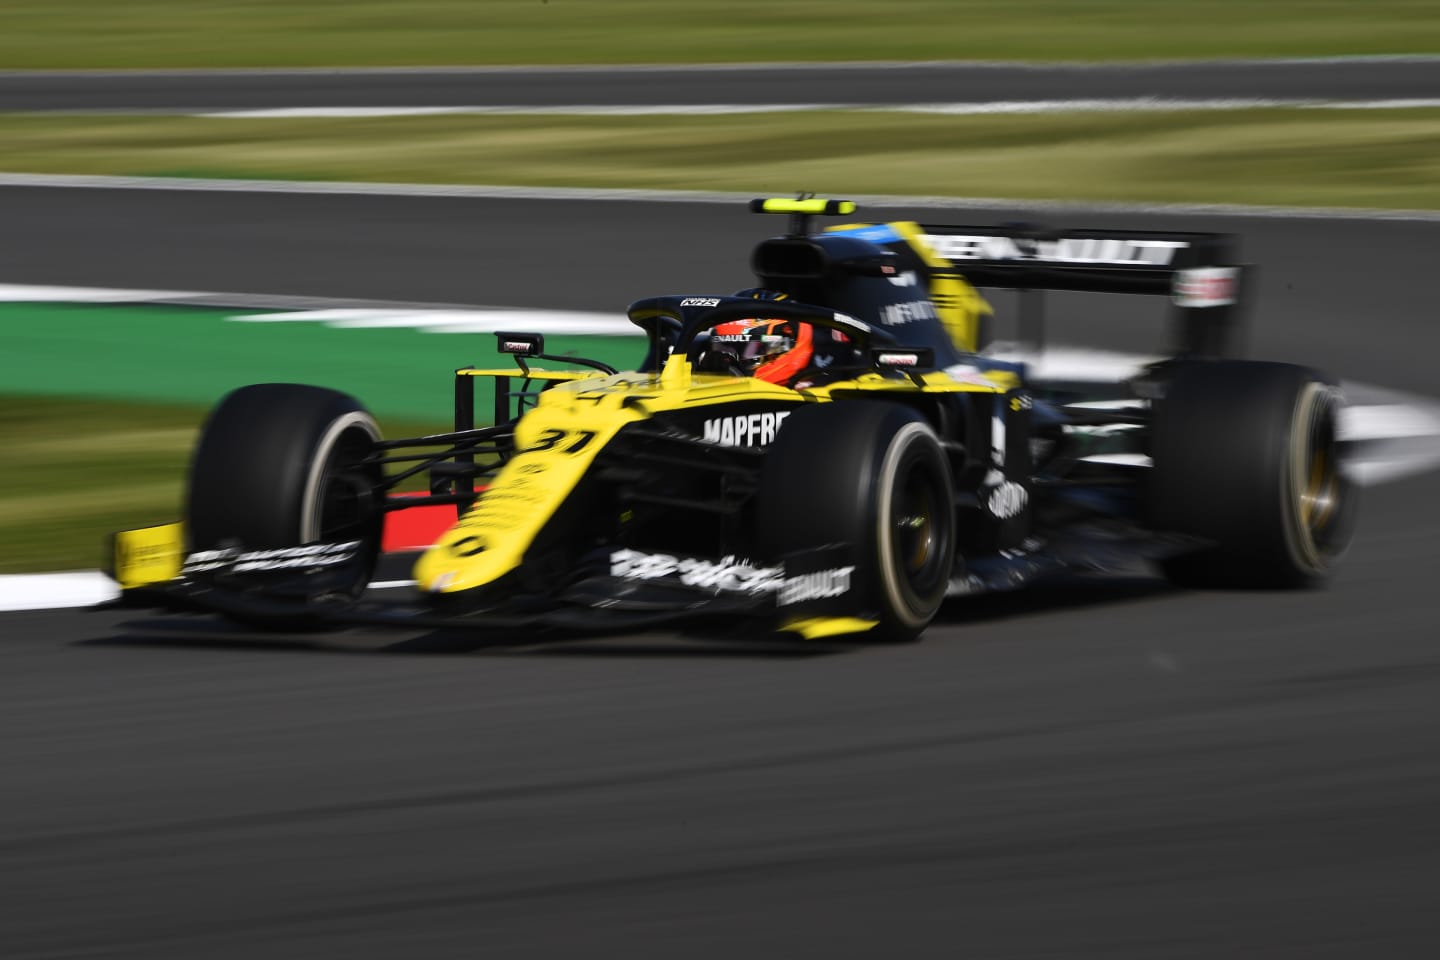 NORTHAMPTON, ENGLAND - JULY 31: Esteban Ocon of France driving the (31) Renault Sport Formula One Team RS20 on track during practice for the F1 Grand Prix of Great Britain at Silverstone on July 31, 2020 in Northampton, England. (Photo by Rudy Carezzevoli/Getty Images)